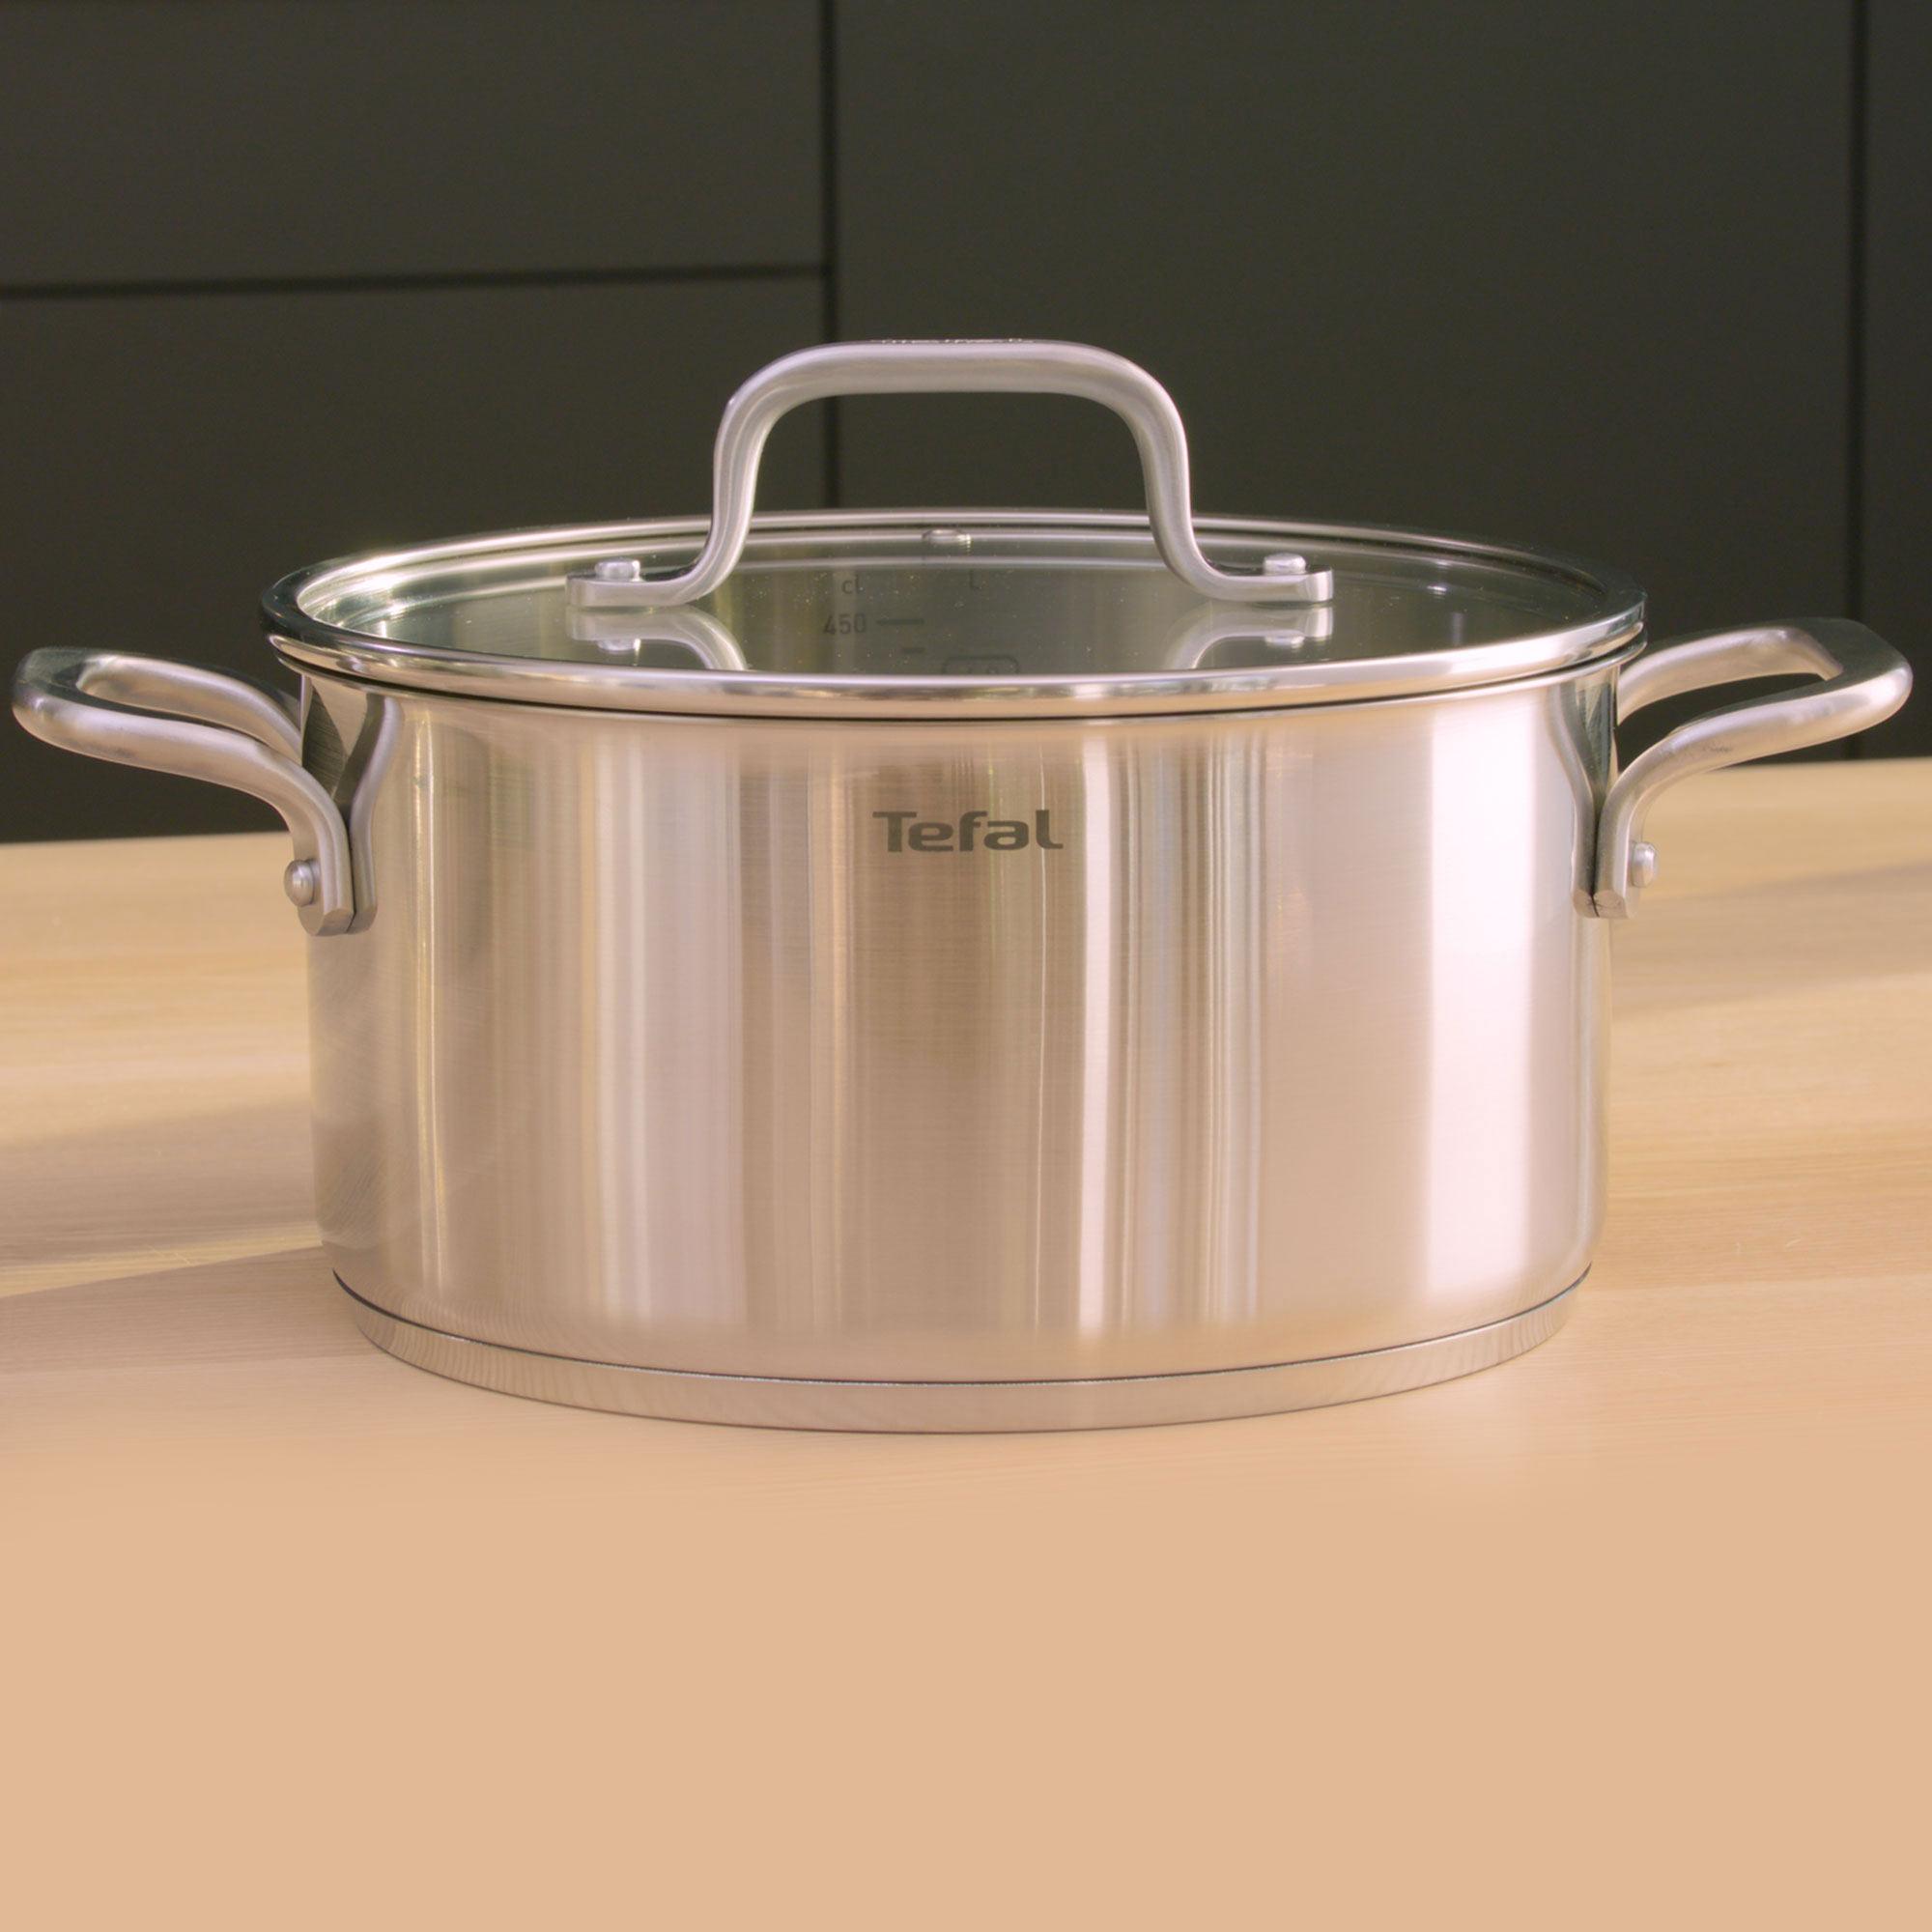 Tefal Virtuoso Stainless Steel Stewpot 24cm - 5.4L Image 5